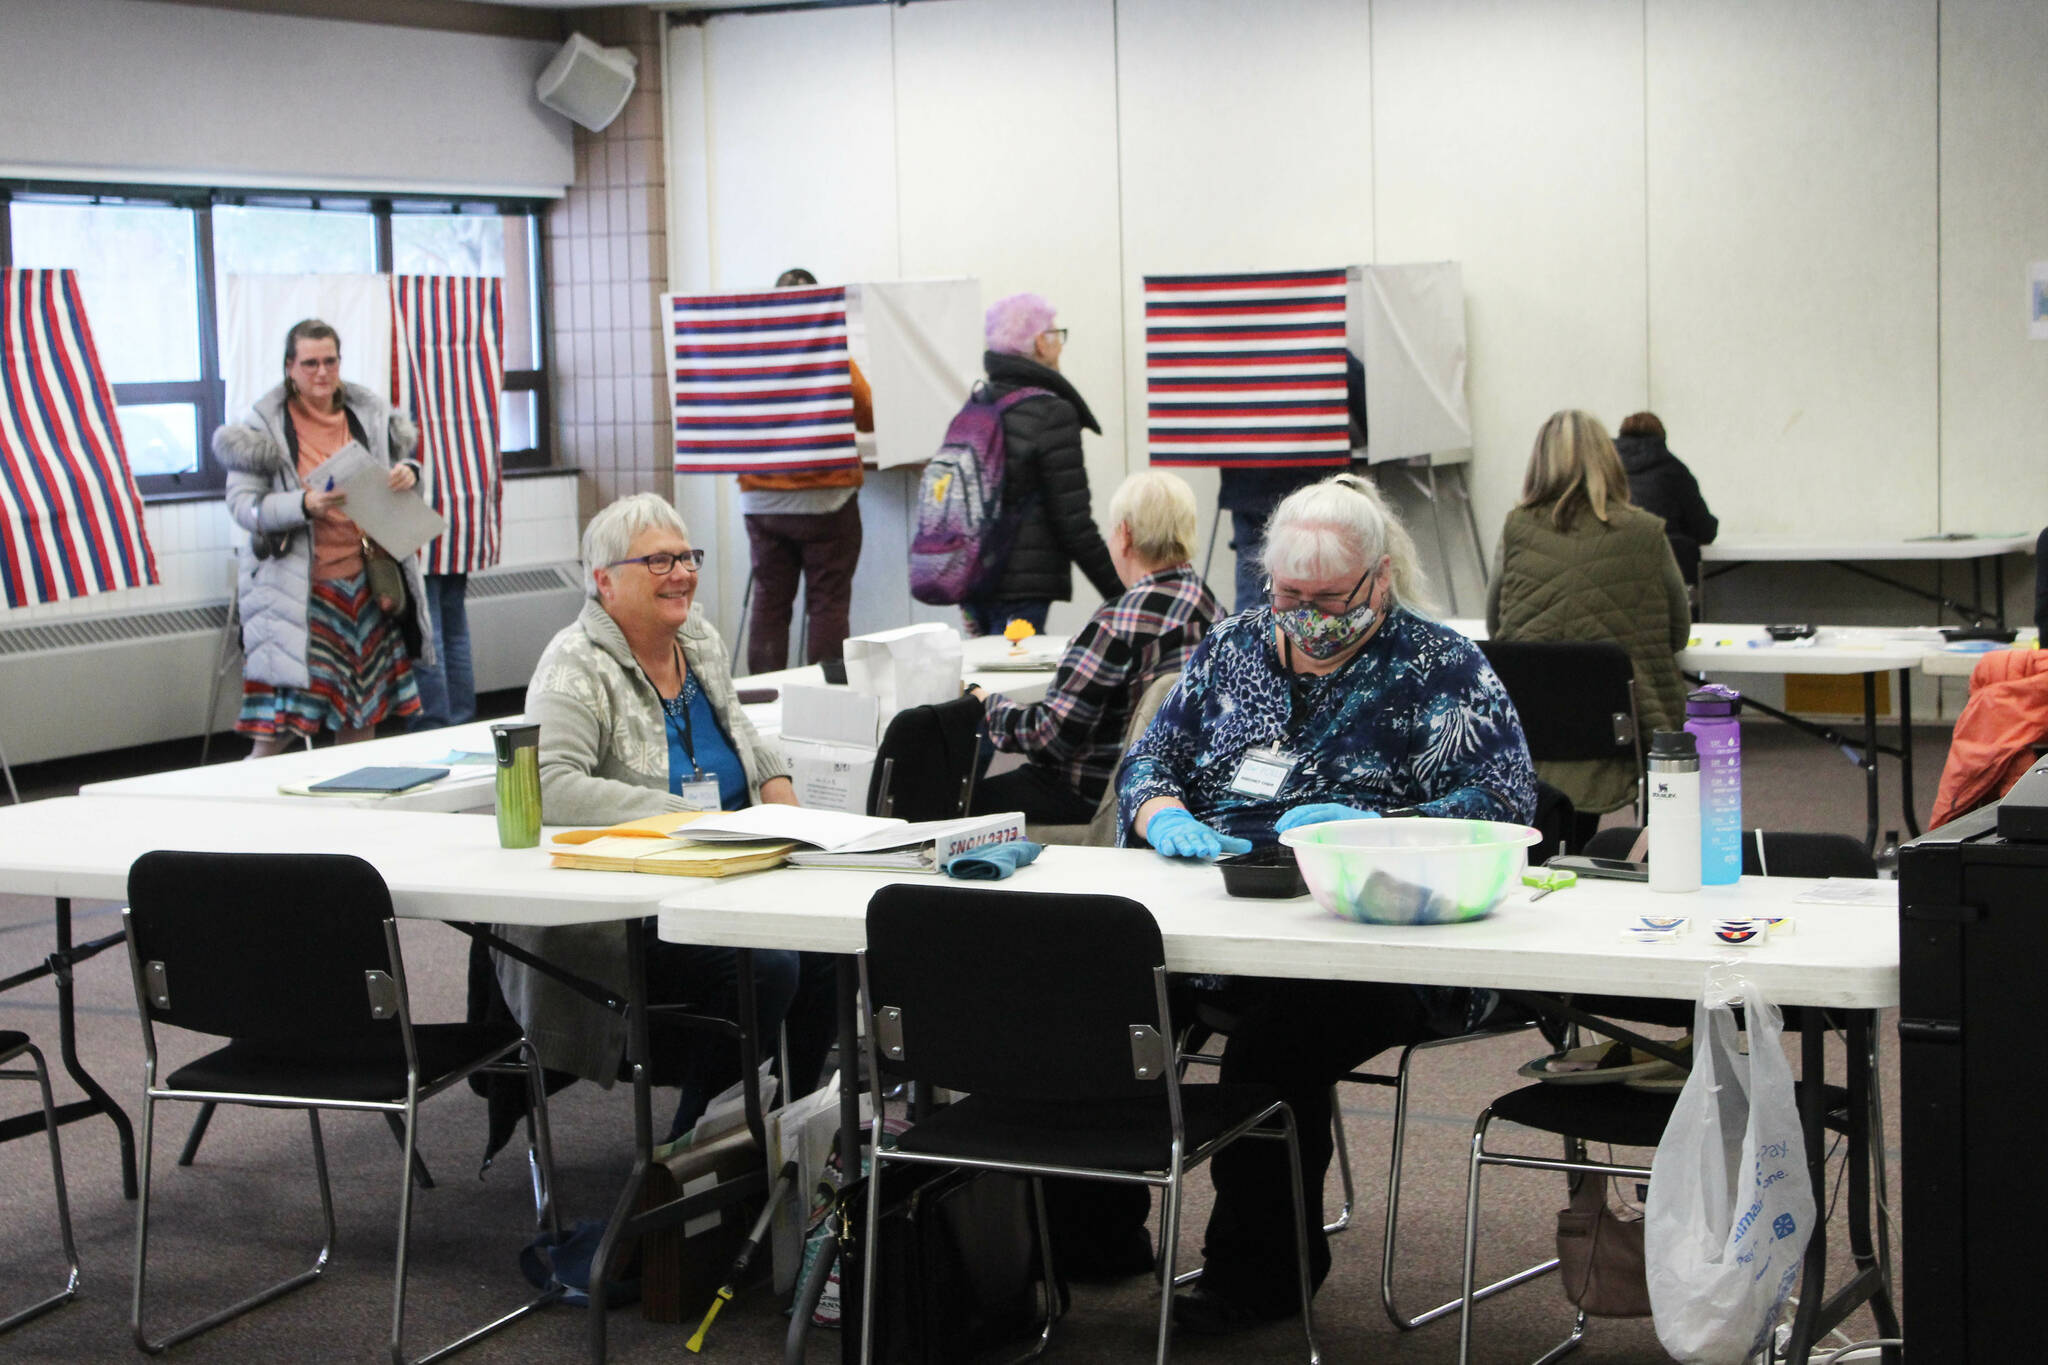 K-Beach Precinct Chair Kathy Carson (right) and Carol Louthan (left) assist voters at the Soldotna Regional Sports Complex on Tuesday, Nov. 8, 2022 in Soldotna, Alaska. (Ashlyn O'Hara/Peninsula Clarion)